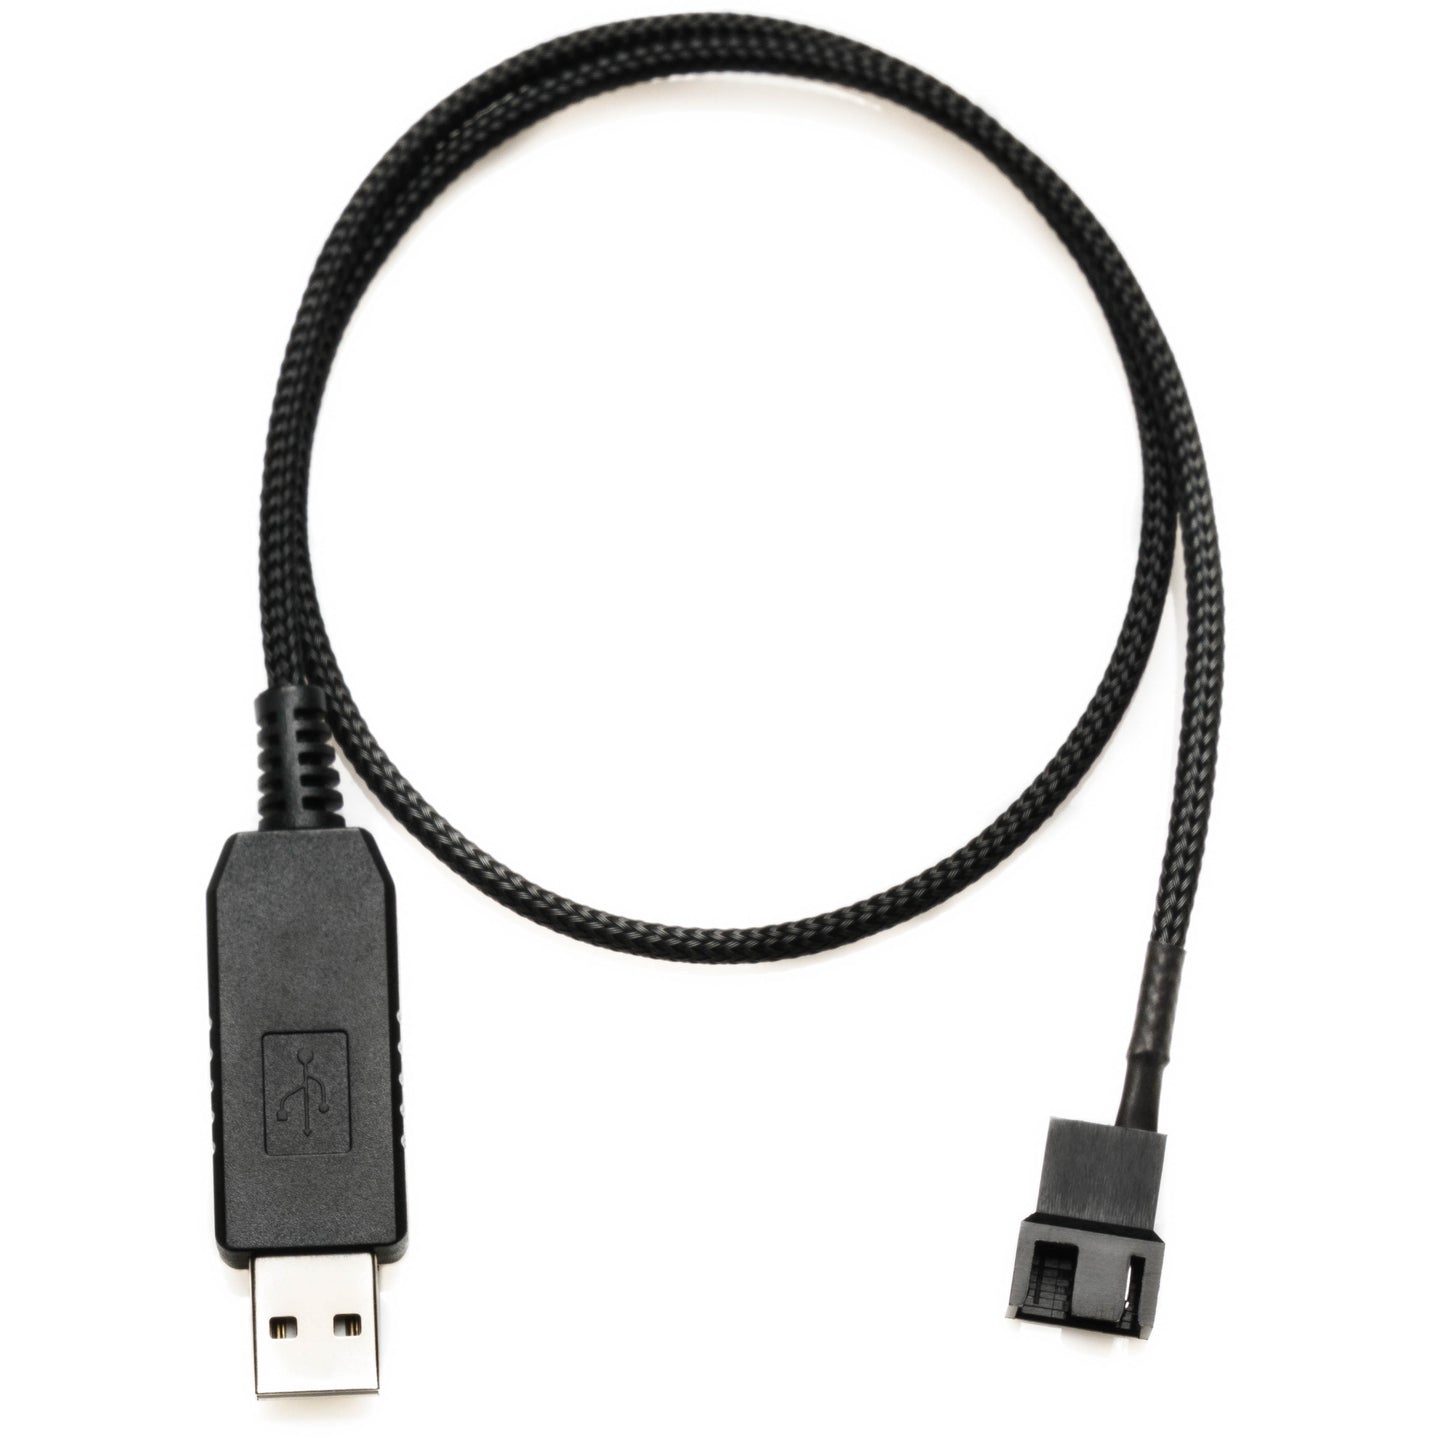 USB 12V to 4-Pin Fan Power Adapter Cable